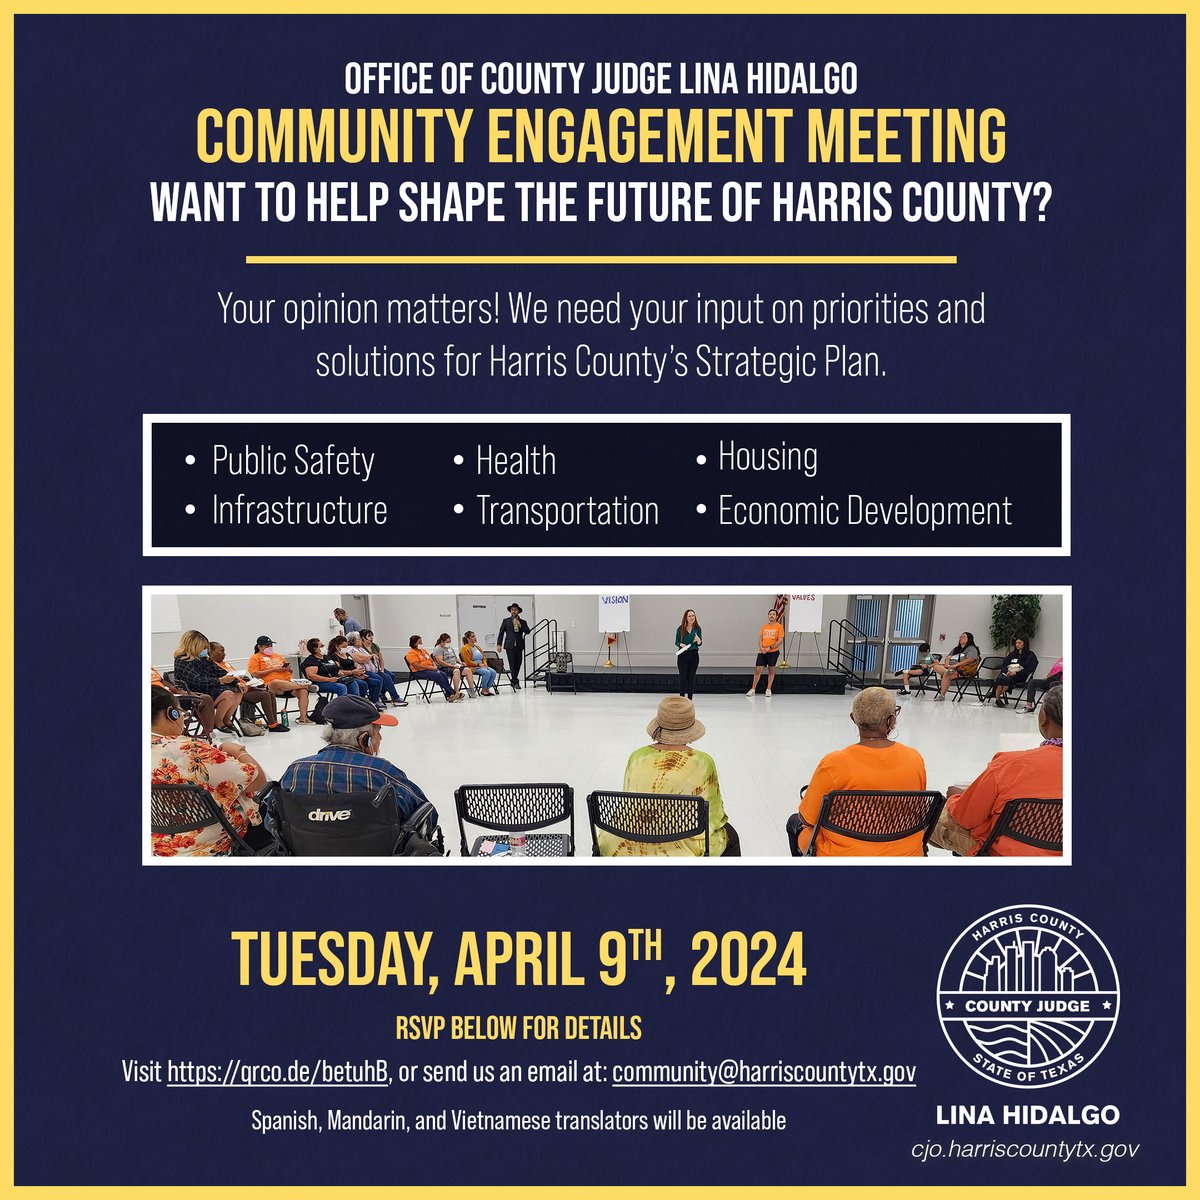 Join us April 9th from 3 p.m. to 7 p.m! We’ll be discussing transportation, public safety, housing, infrastructure, and health. We only need ONE HOUR of your time to share your input. RSVP at qrco.de/betuhB or via email at community@harriscountytx.gov